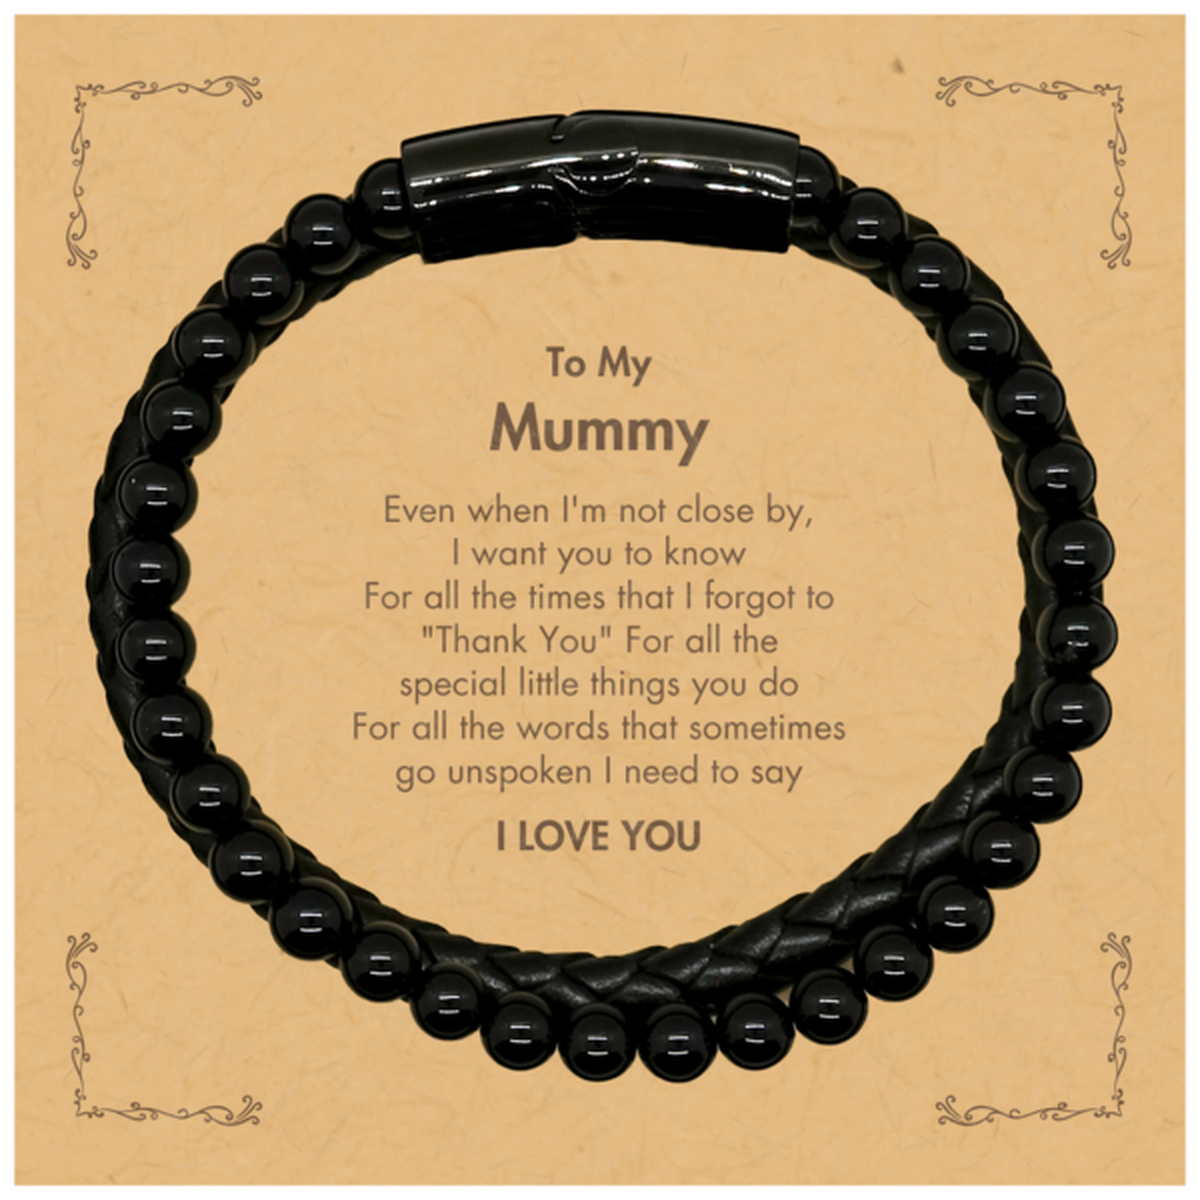 Thank You Gifts for Mummy, Keepsake Stone Leather Bracelets Gifts for Mummy Birthday Mother's day Father's Day Mummy For all the words That sometimes go unspoken I need to say I LOVE YOU